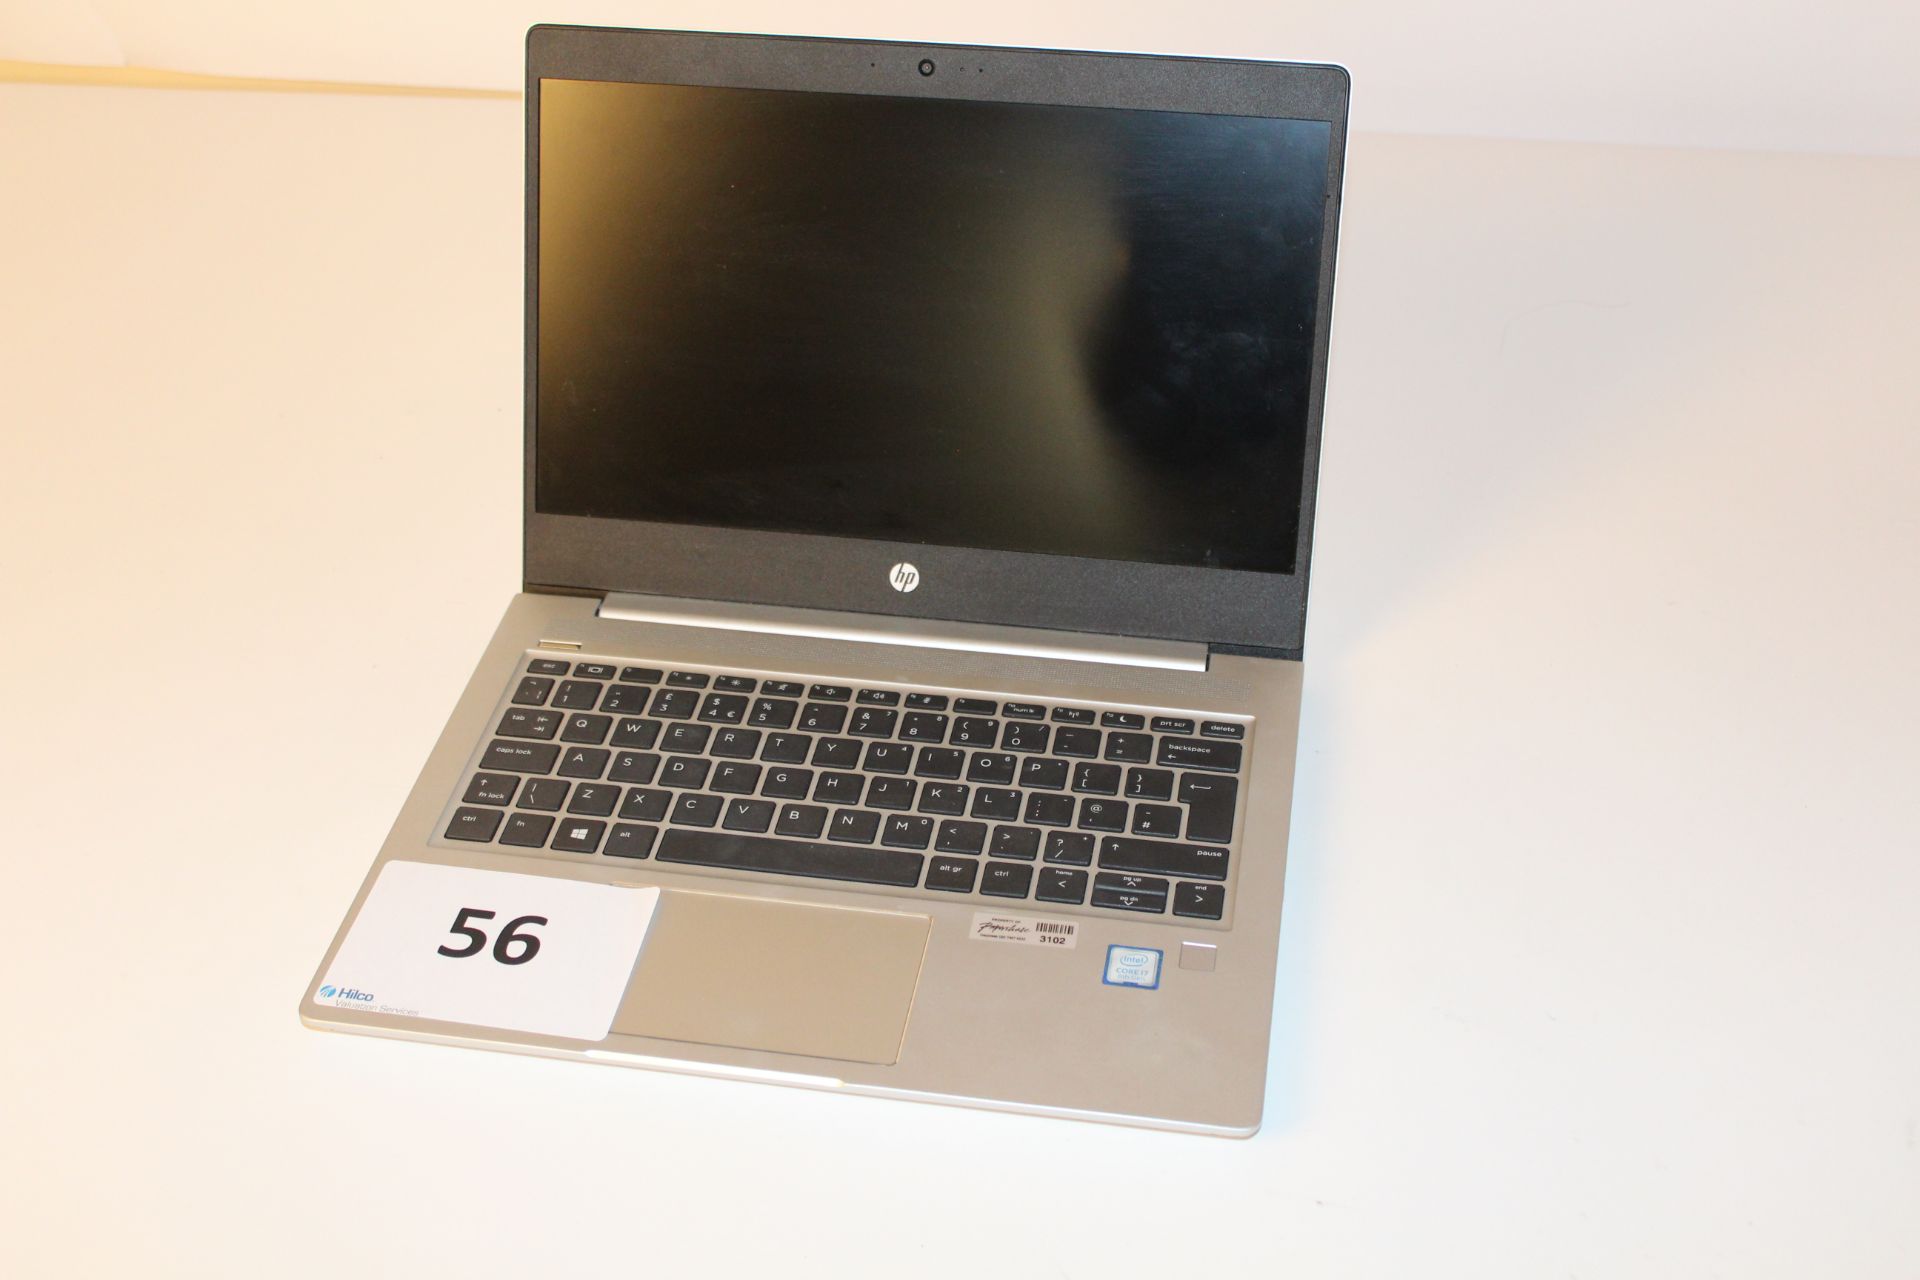 HP ProBook 430 G6 Core i7 Laptop Computer, S/N 5CD0117ROH. No charger